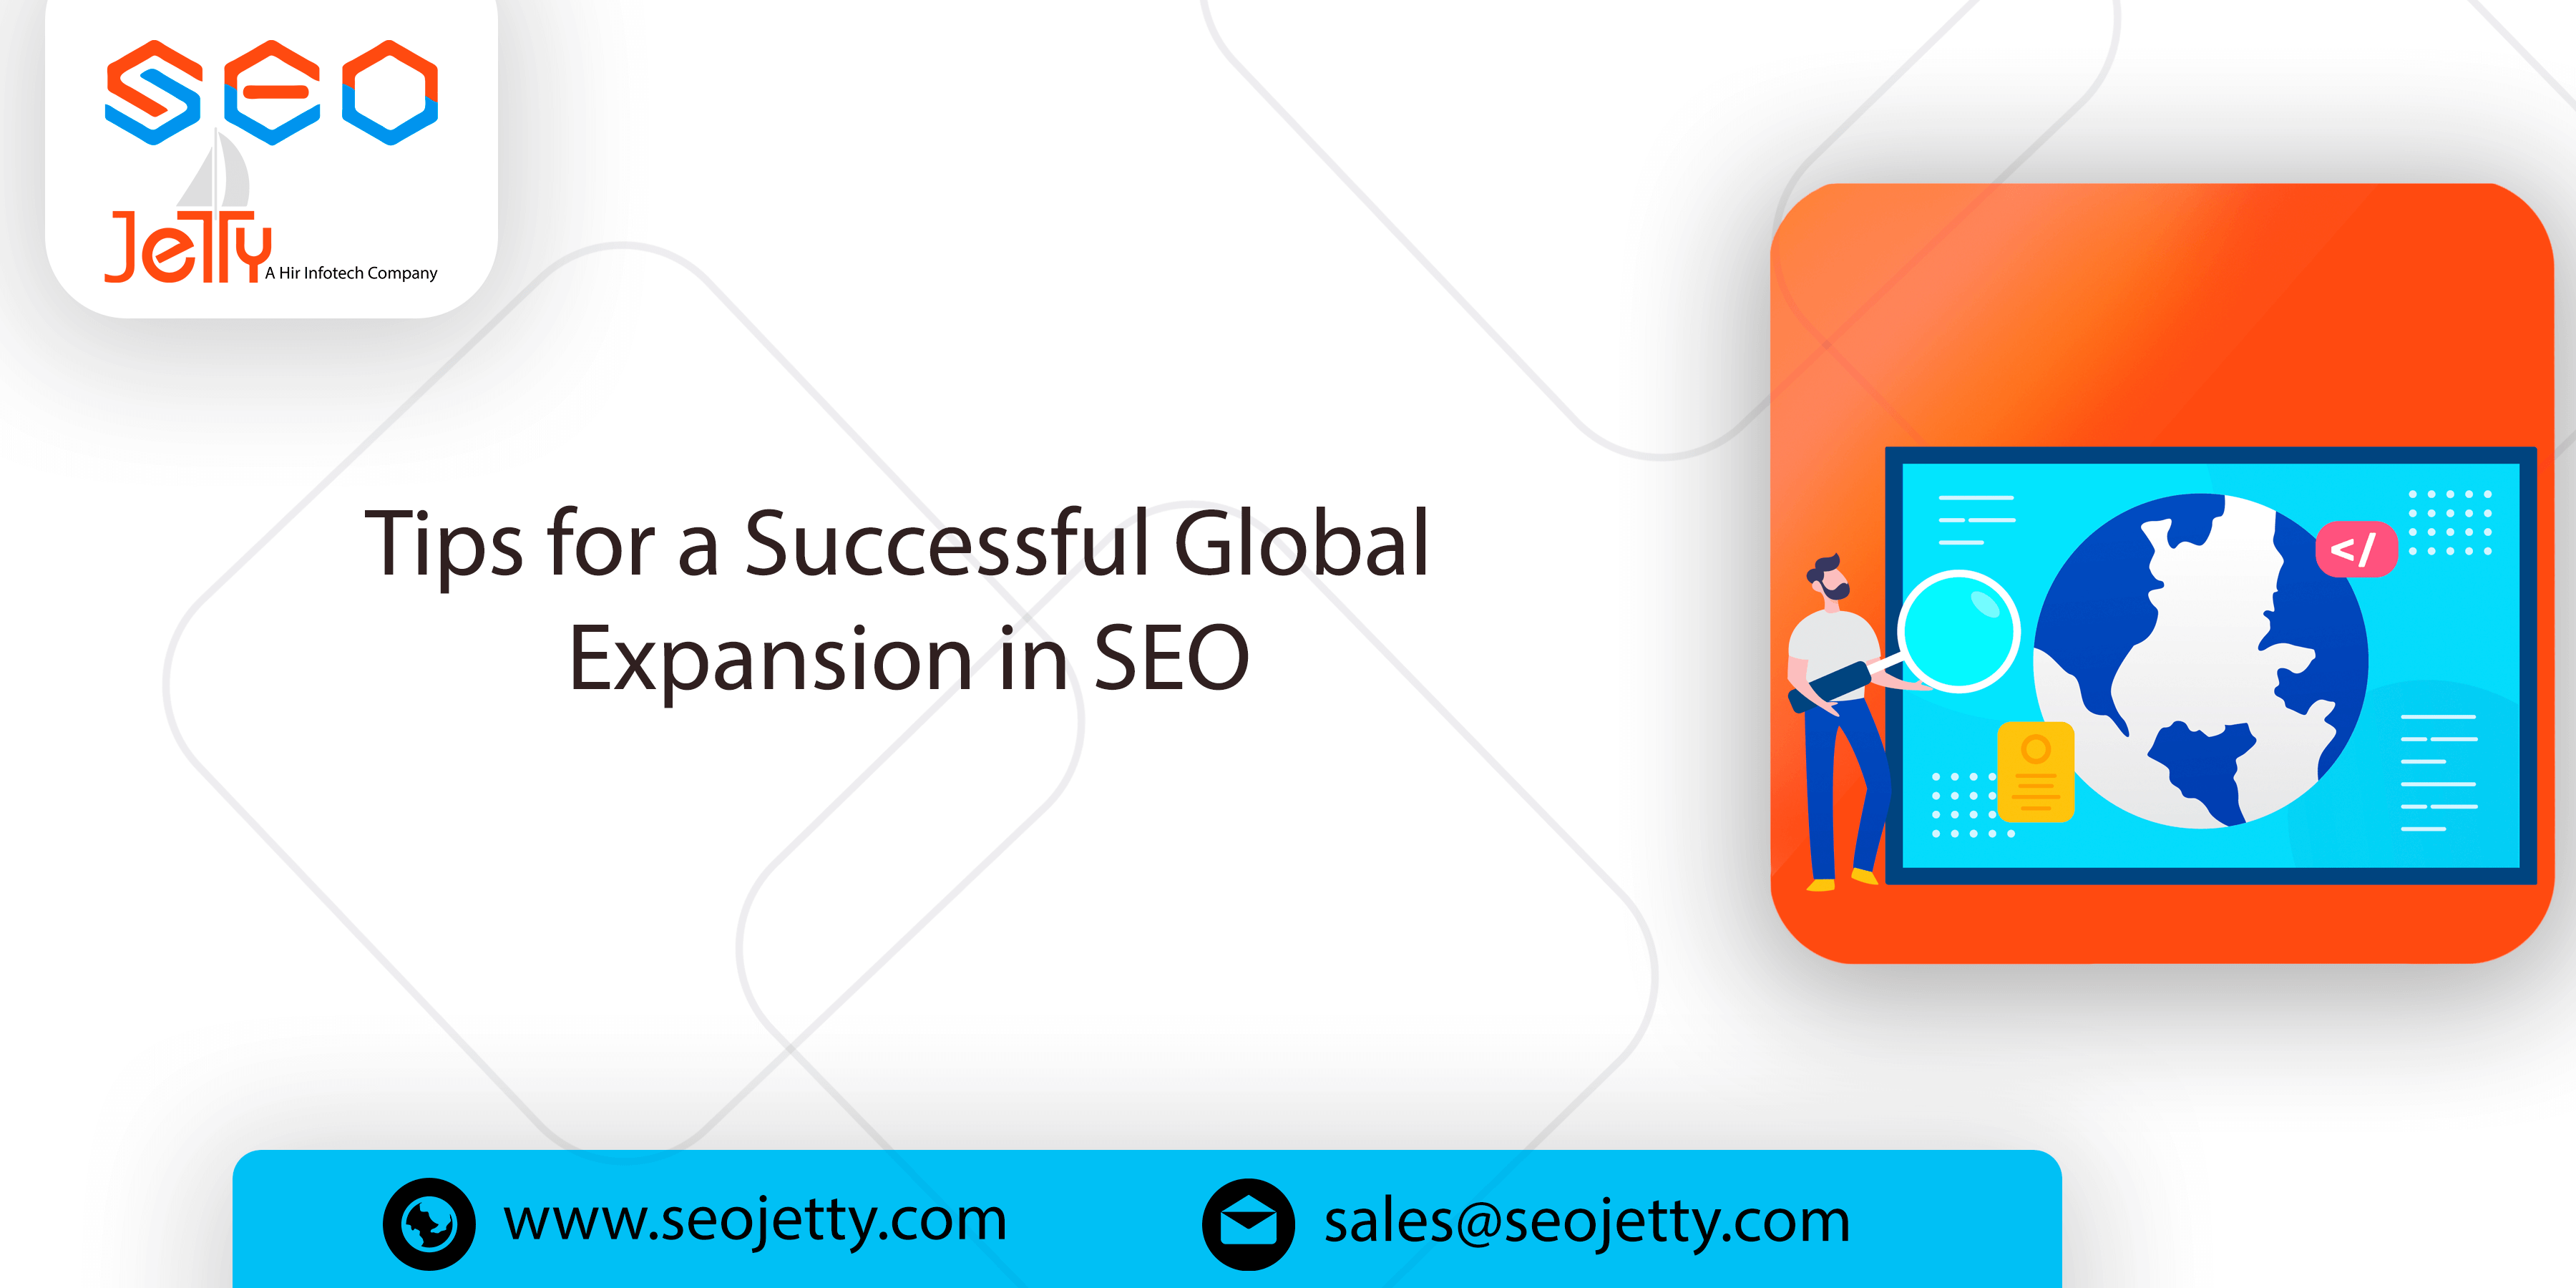 Tips for a Successful Global Expansion in SEO